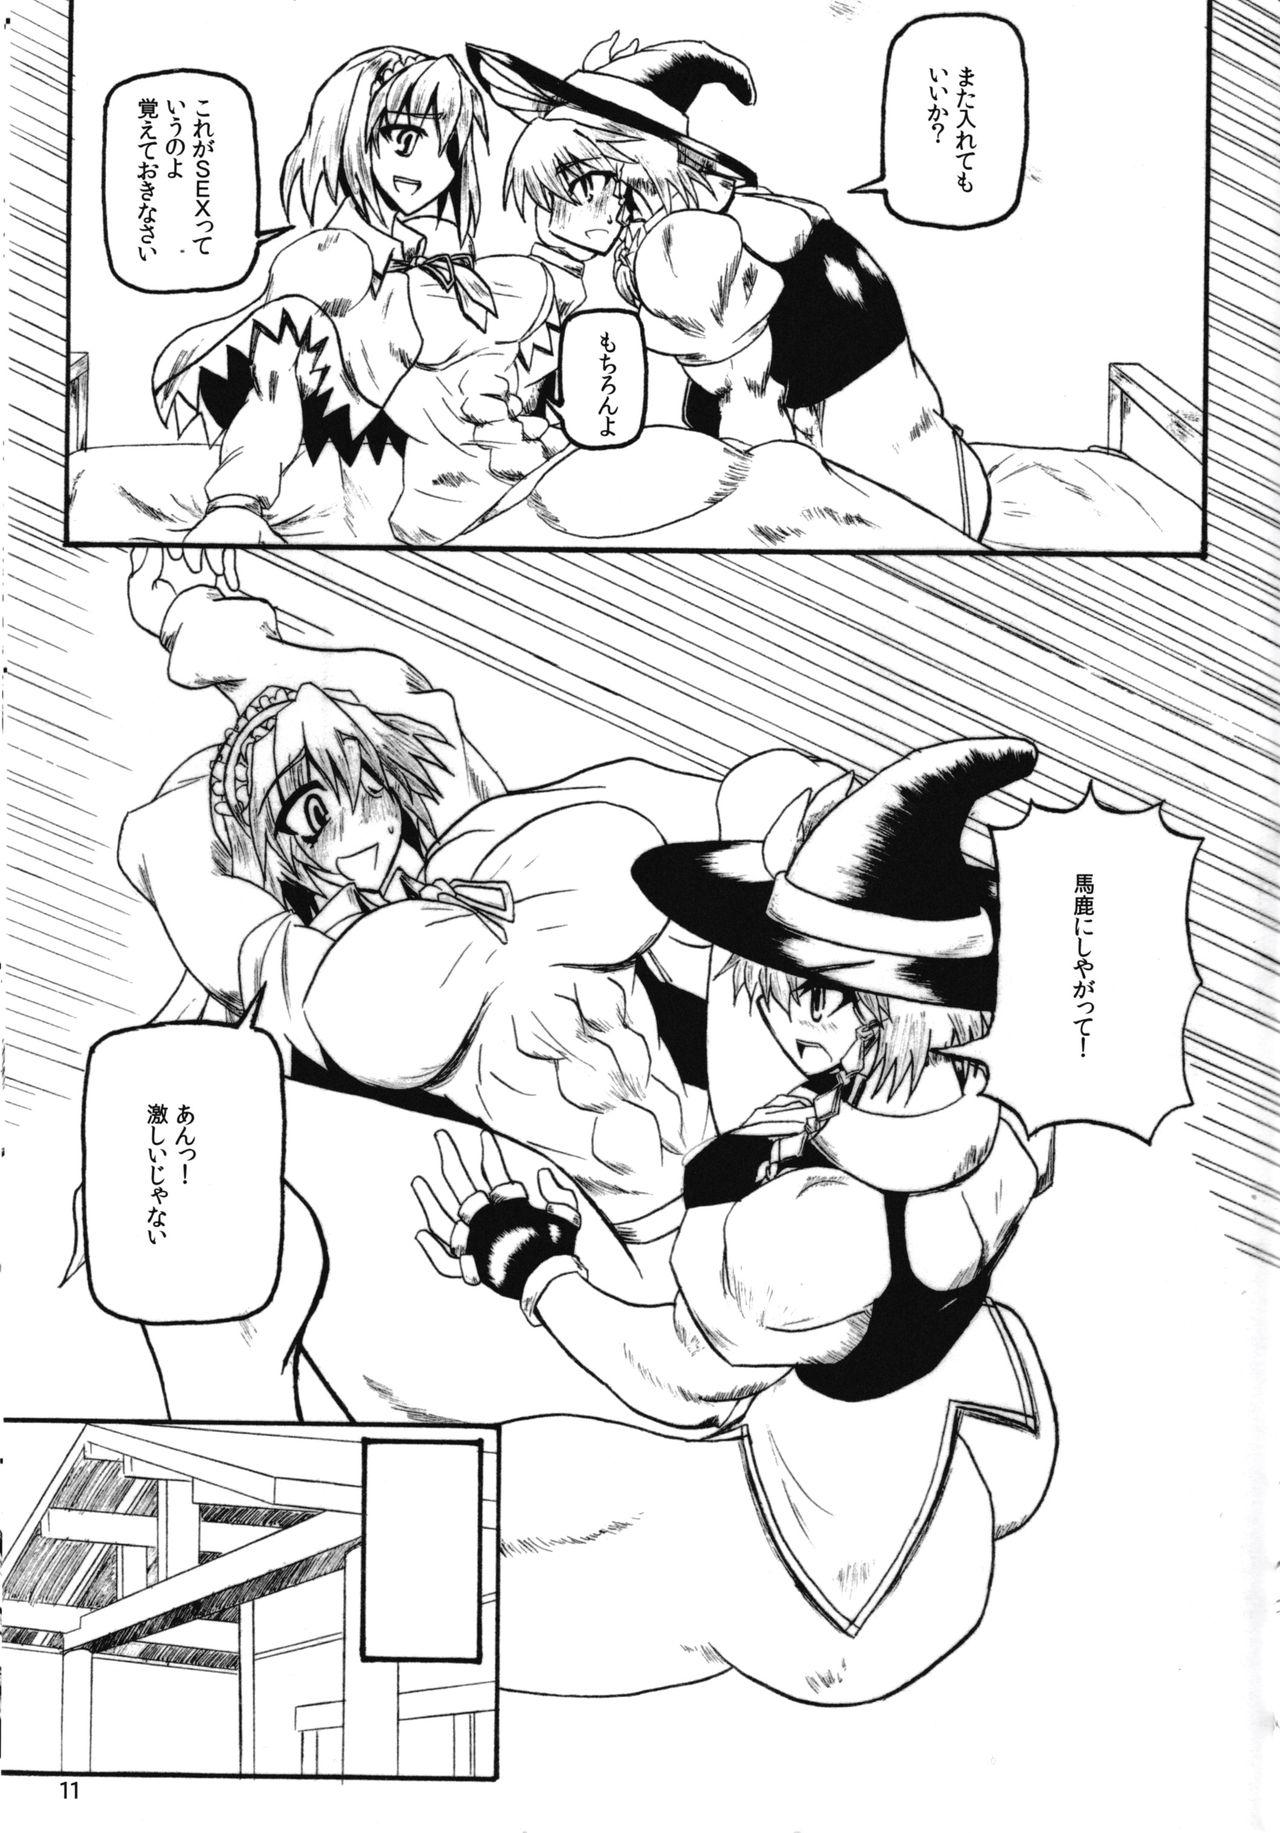 Francaise Exceeds Power of Human2 - Touhou project Role Play - Page 11